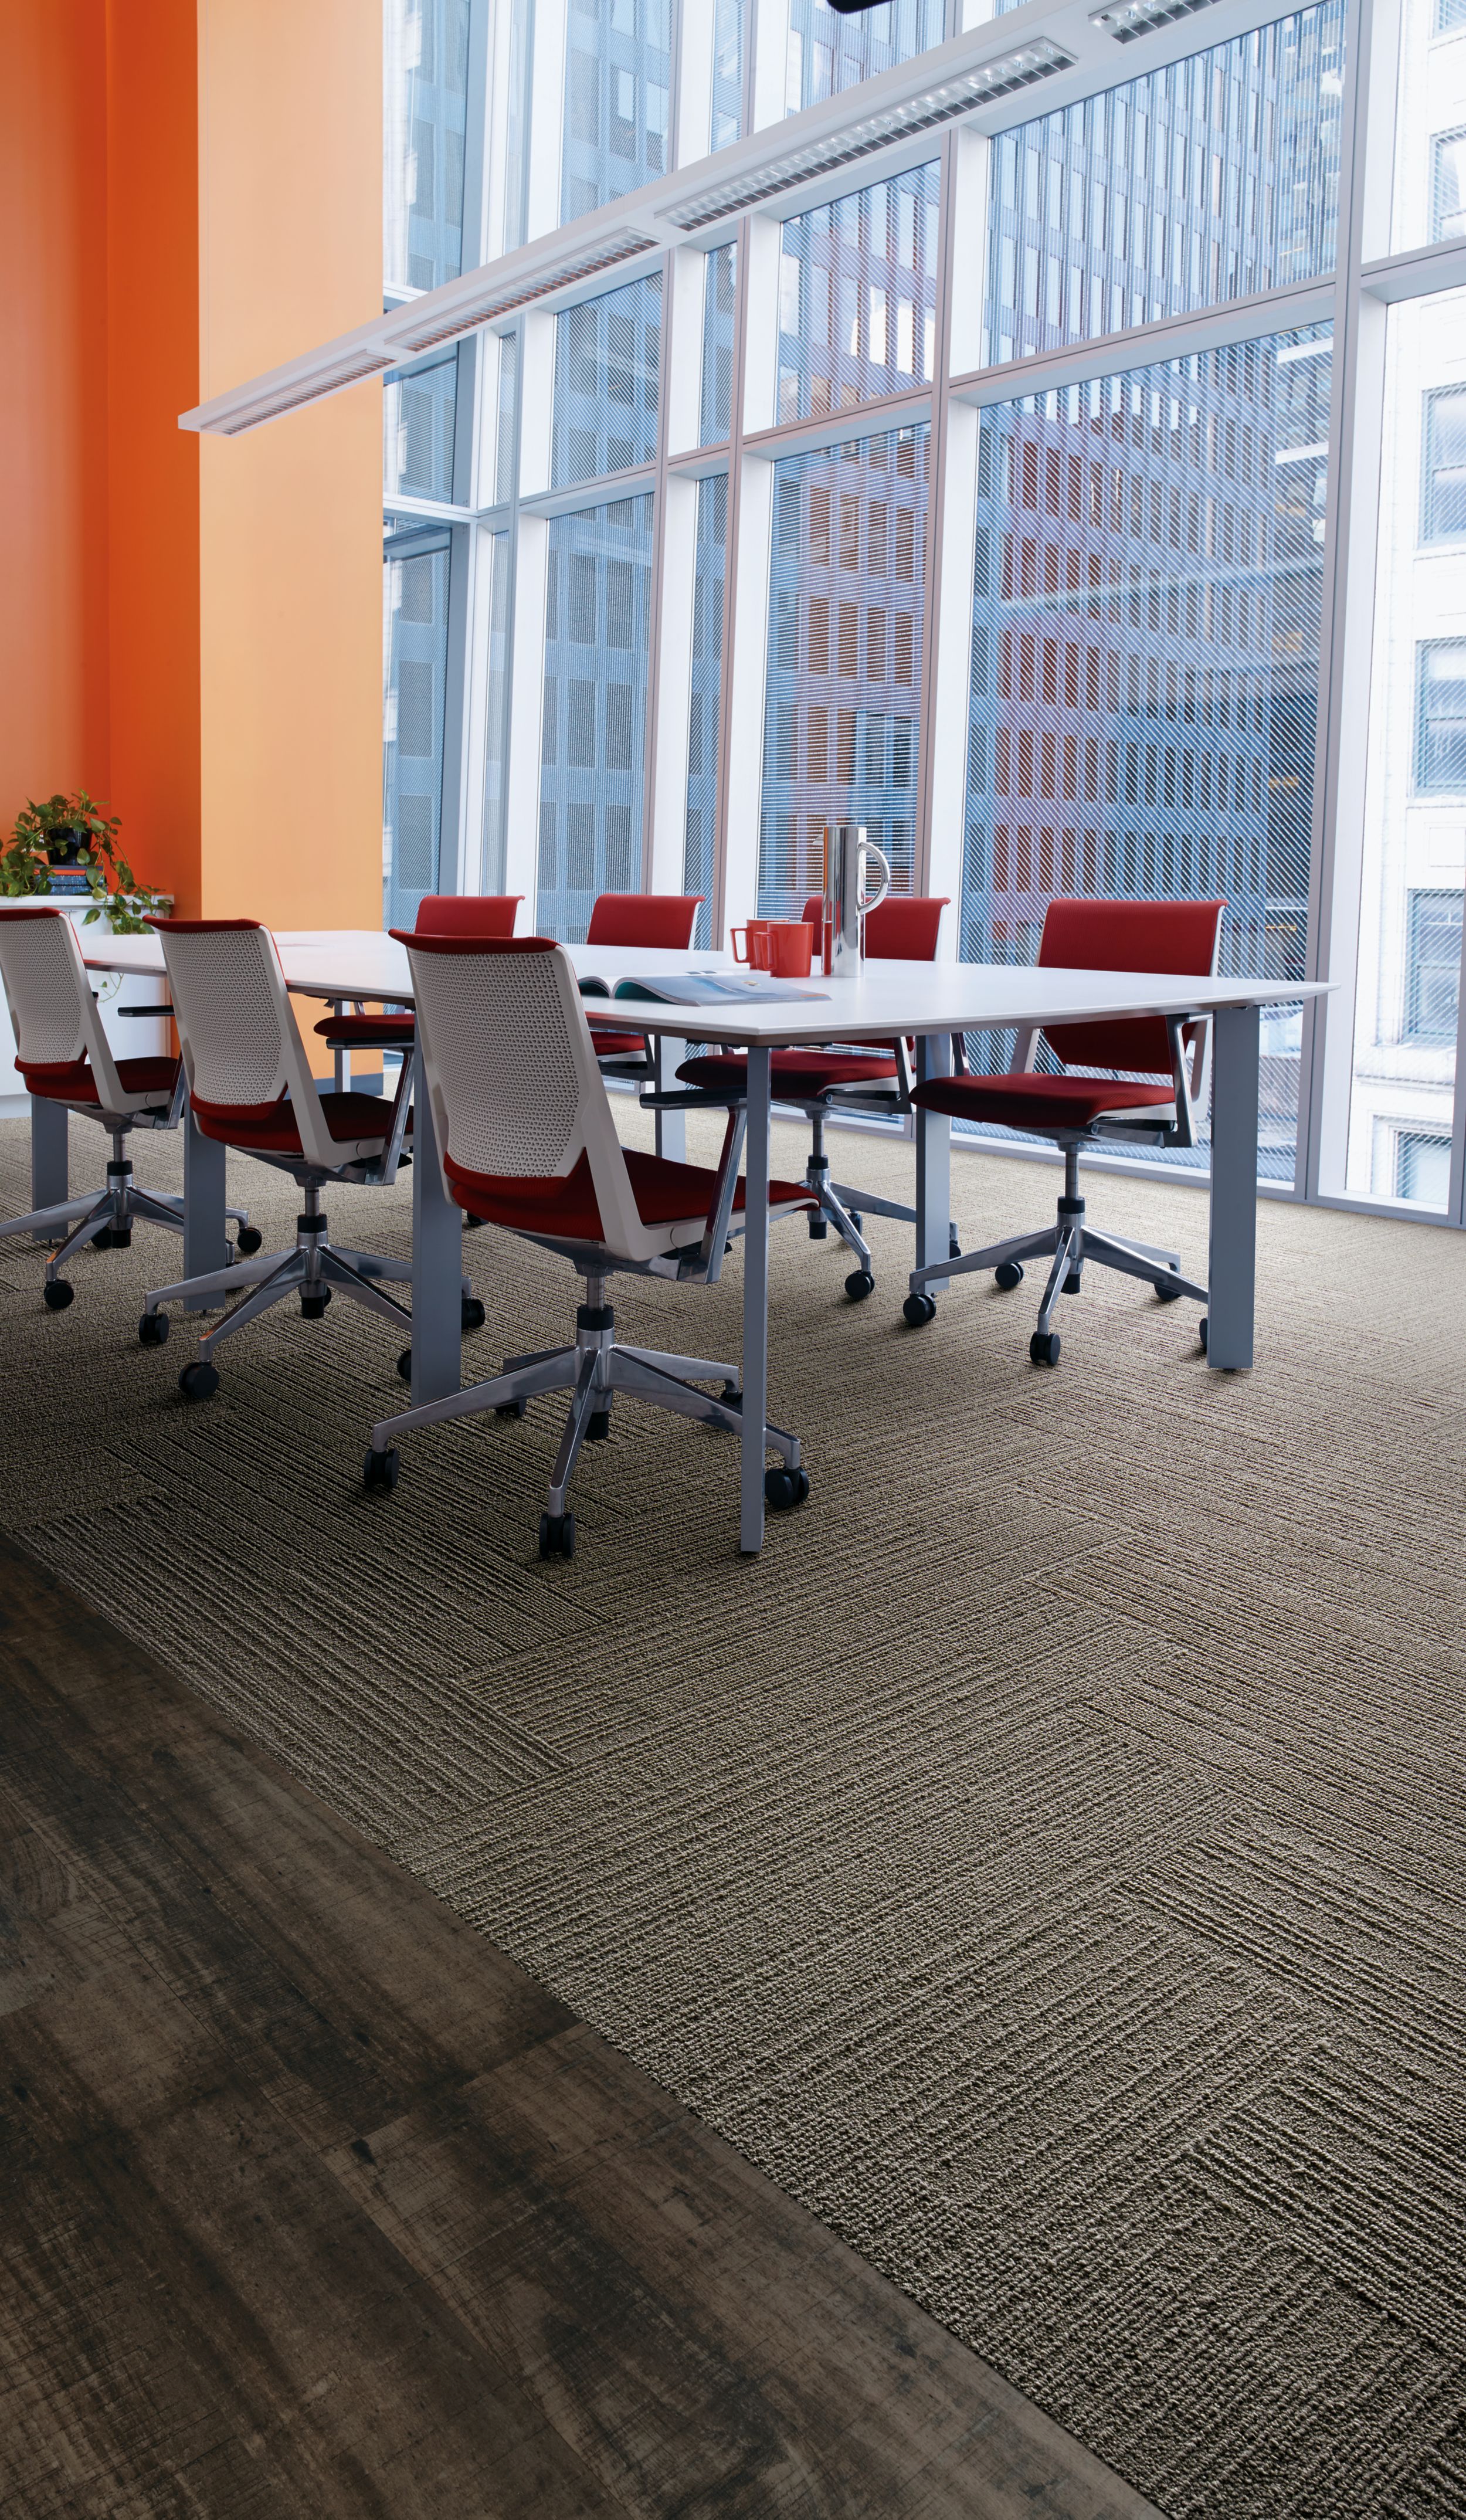 Interface On Line plank carpet tile in meeting room with orange wall and red chairs número de imagen 12